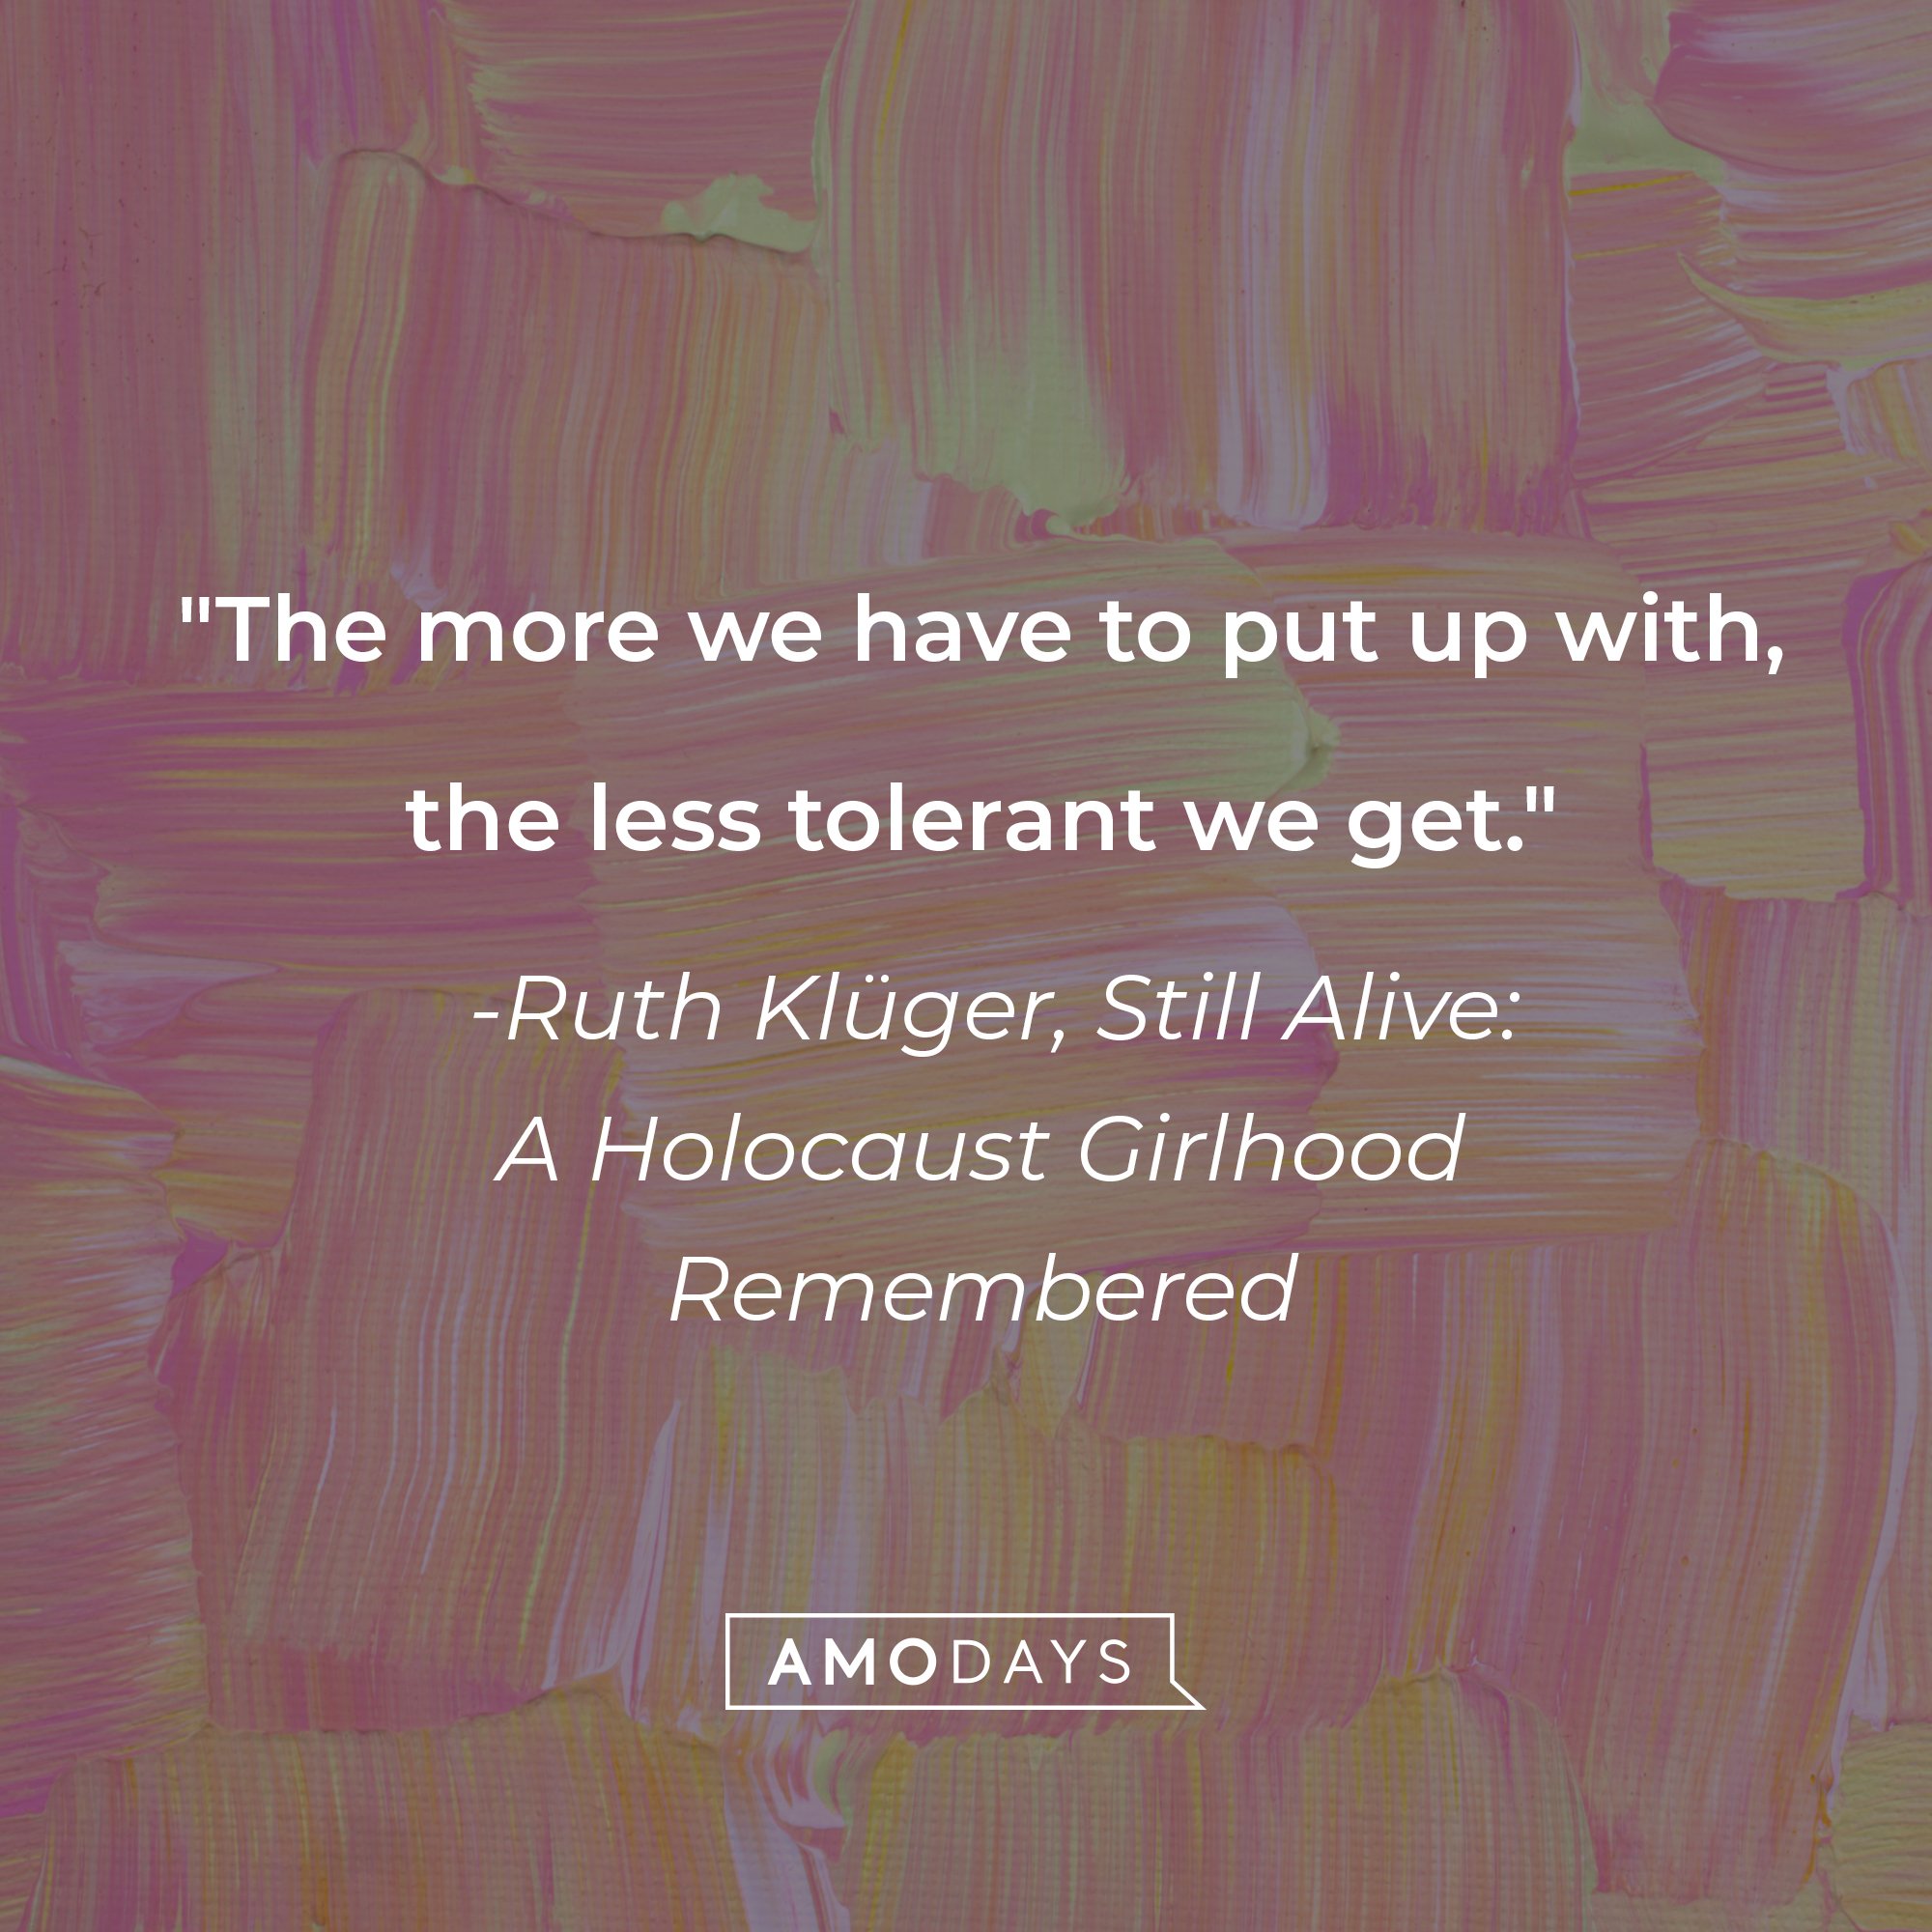 Ruth Klüger, Still Alive: A Holocaust Girlhood Remembered's quote: "The more we have to put up with, the less tolerant we get." | Source: AmoDays